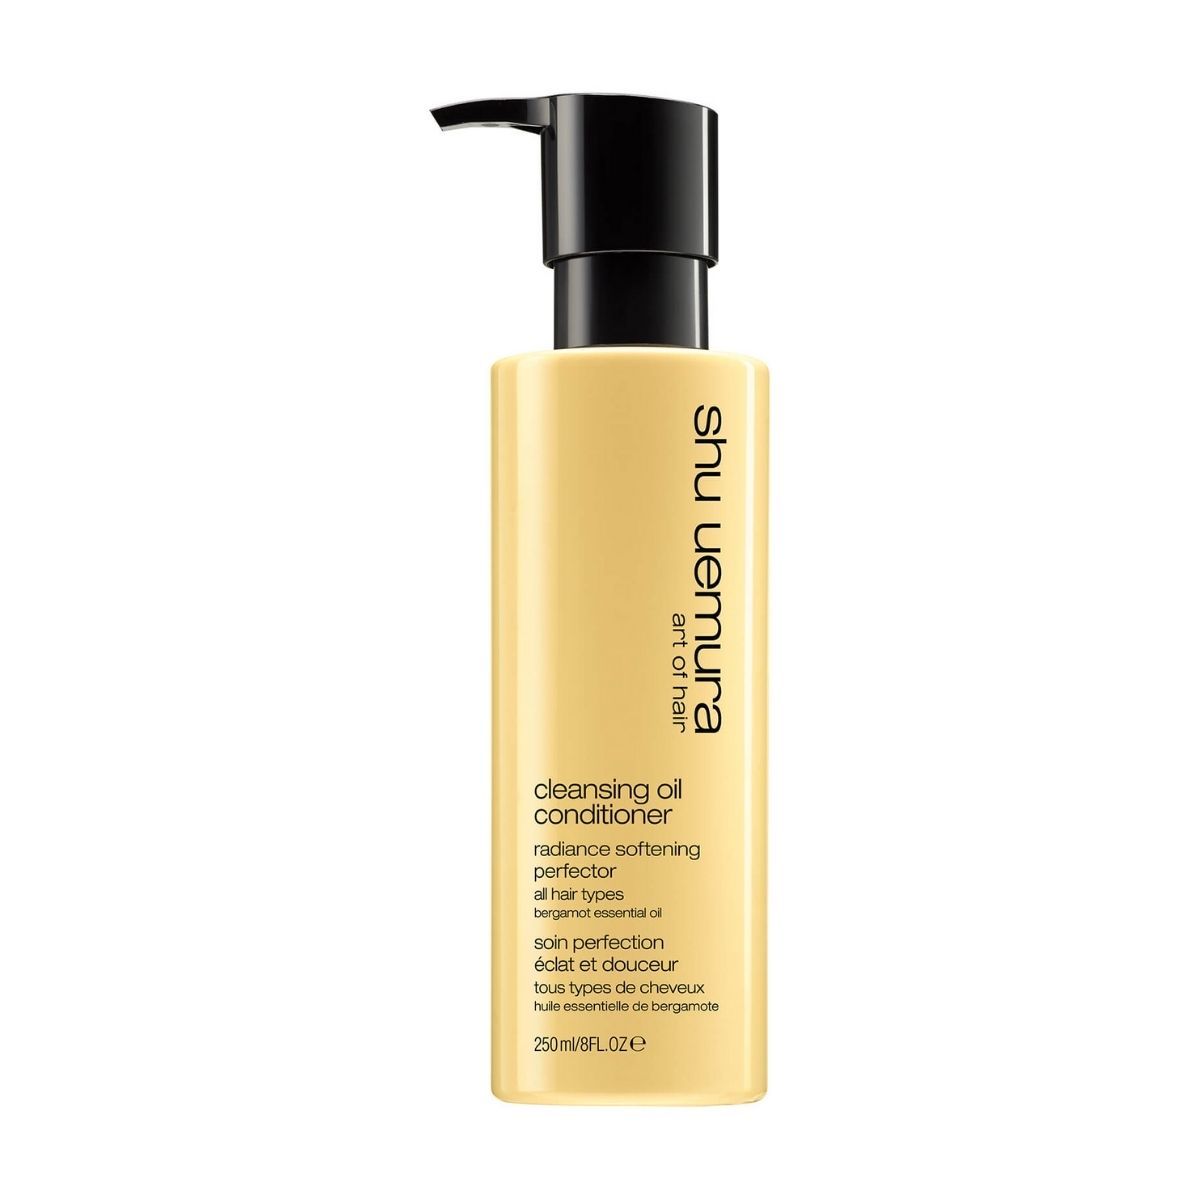 Cleansing Oil Conditioner Radiance Softening Perfector 1